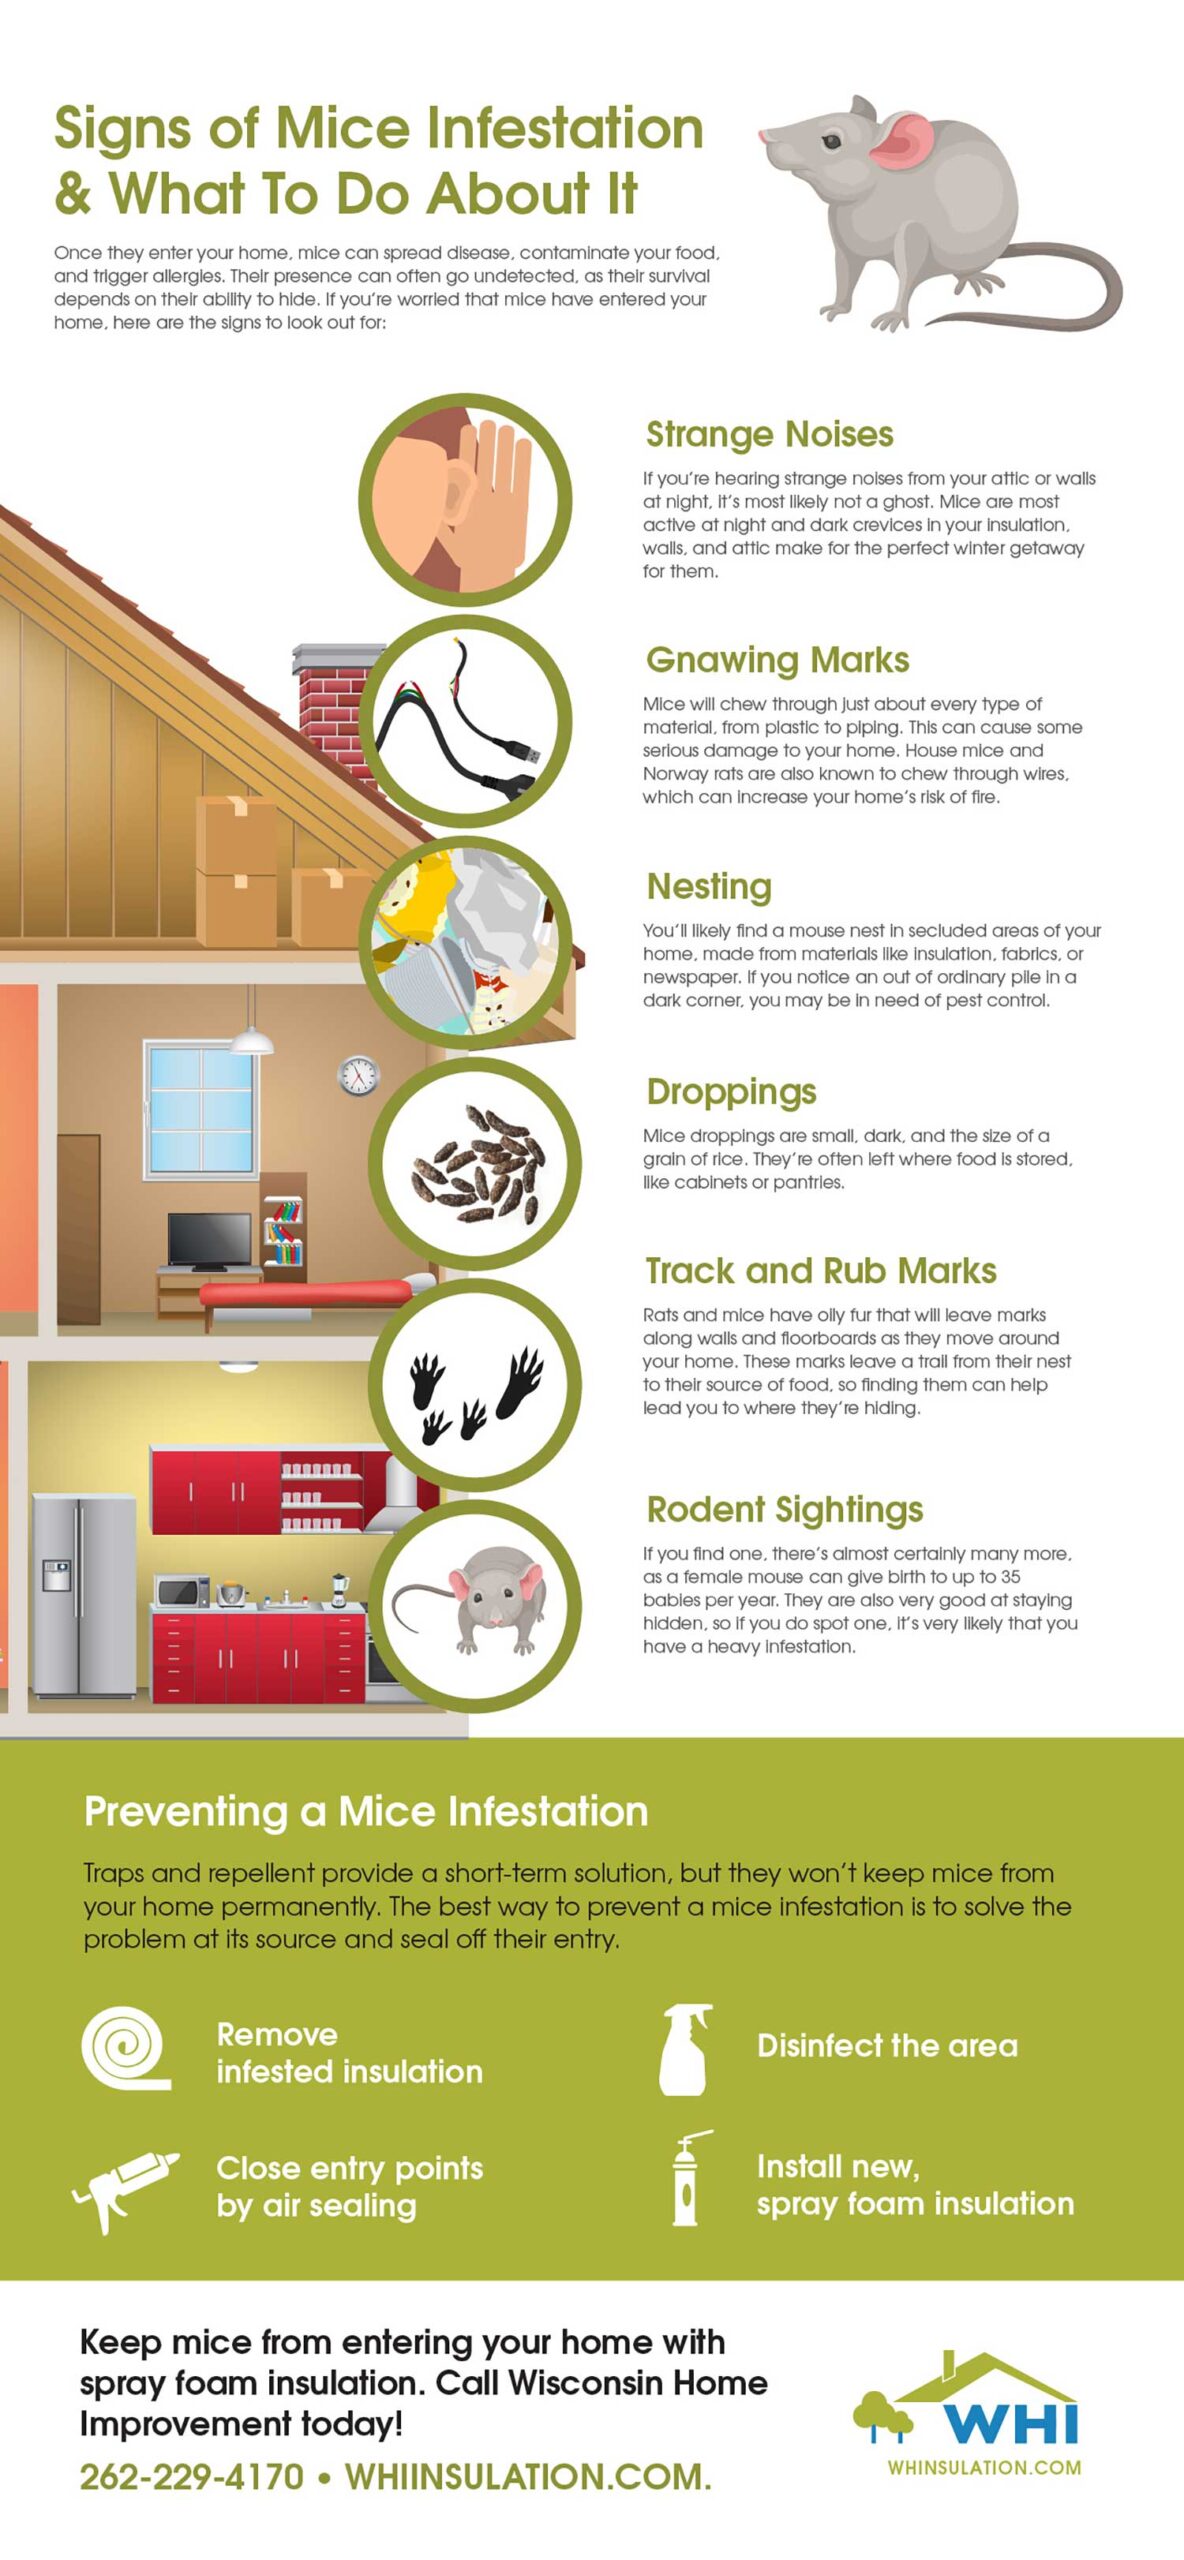 Mice Infestation Infographic for WHI